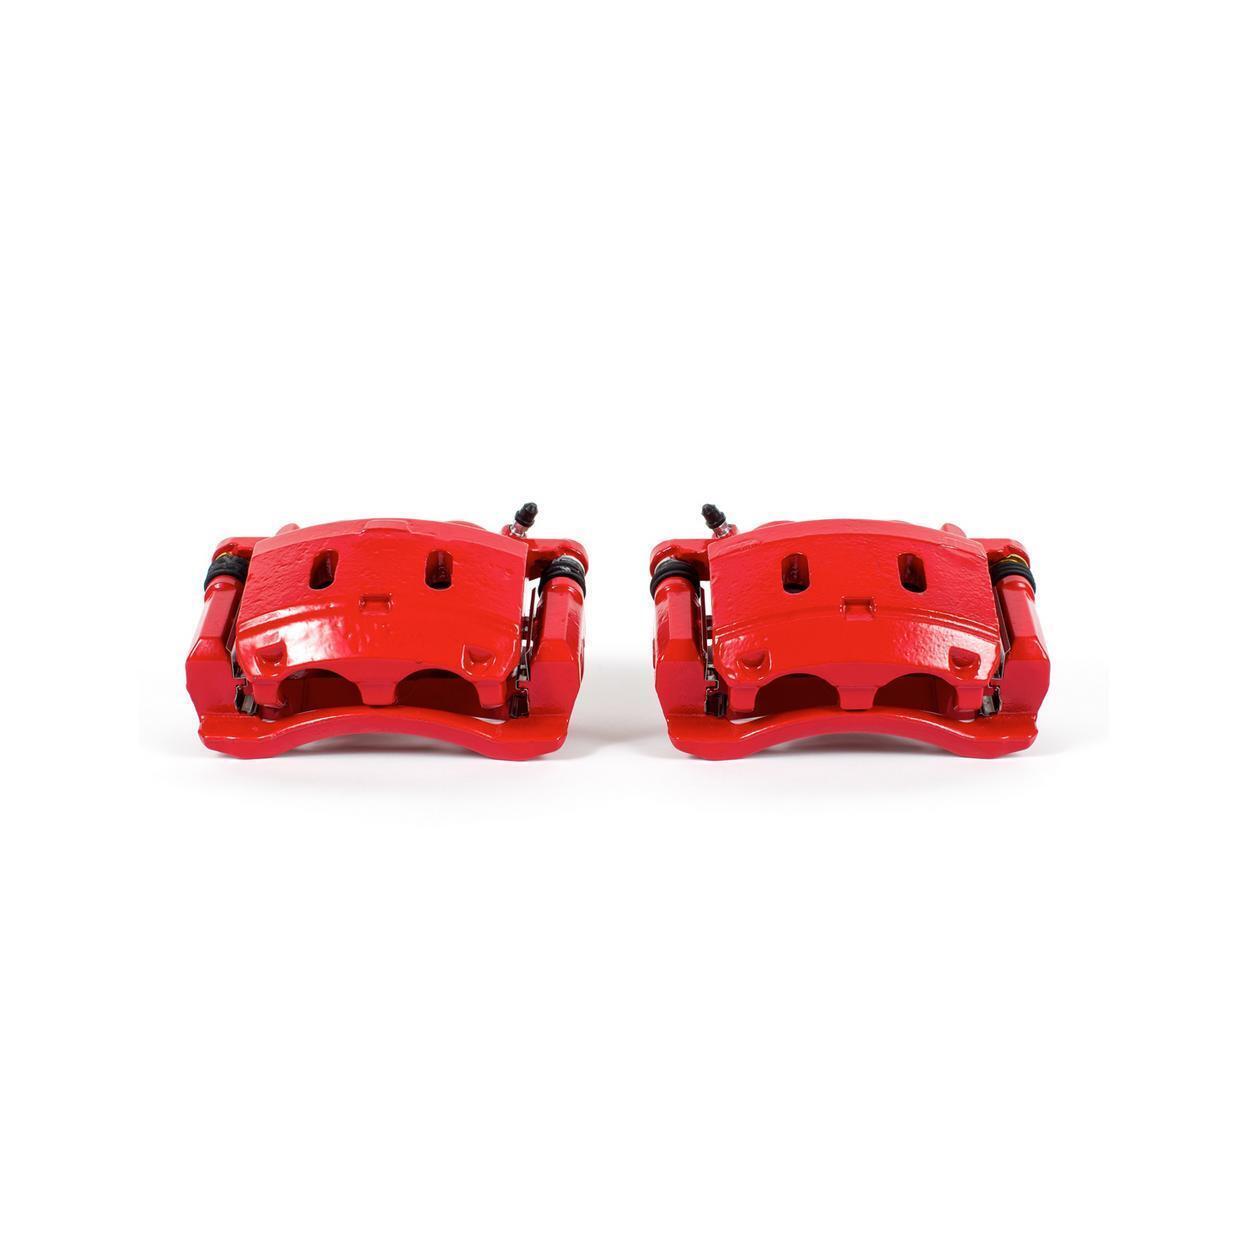 PowerStop Red Powder Coated Calipers Fits S3338 | eBay